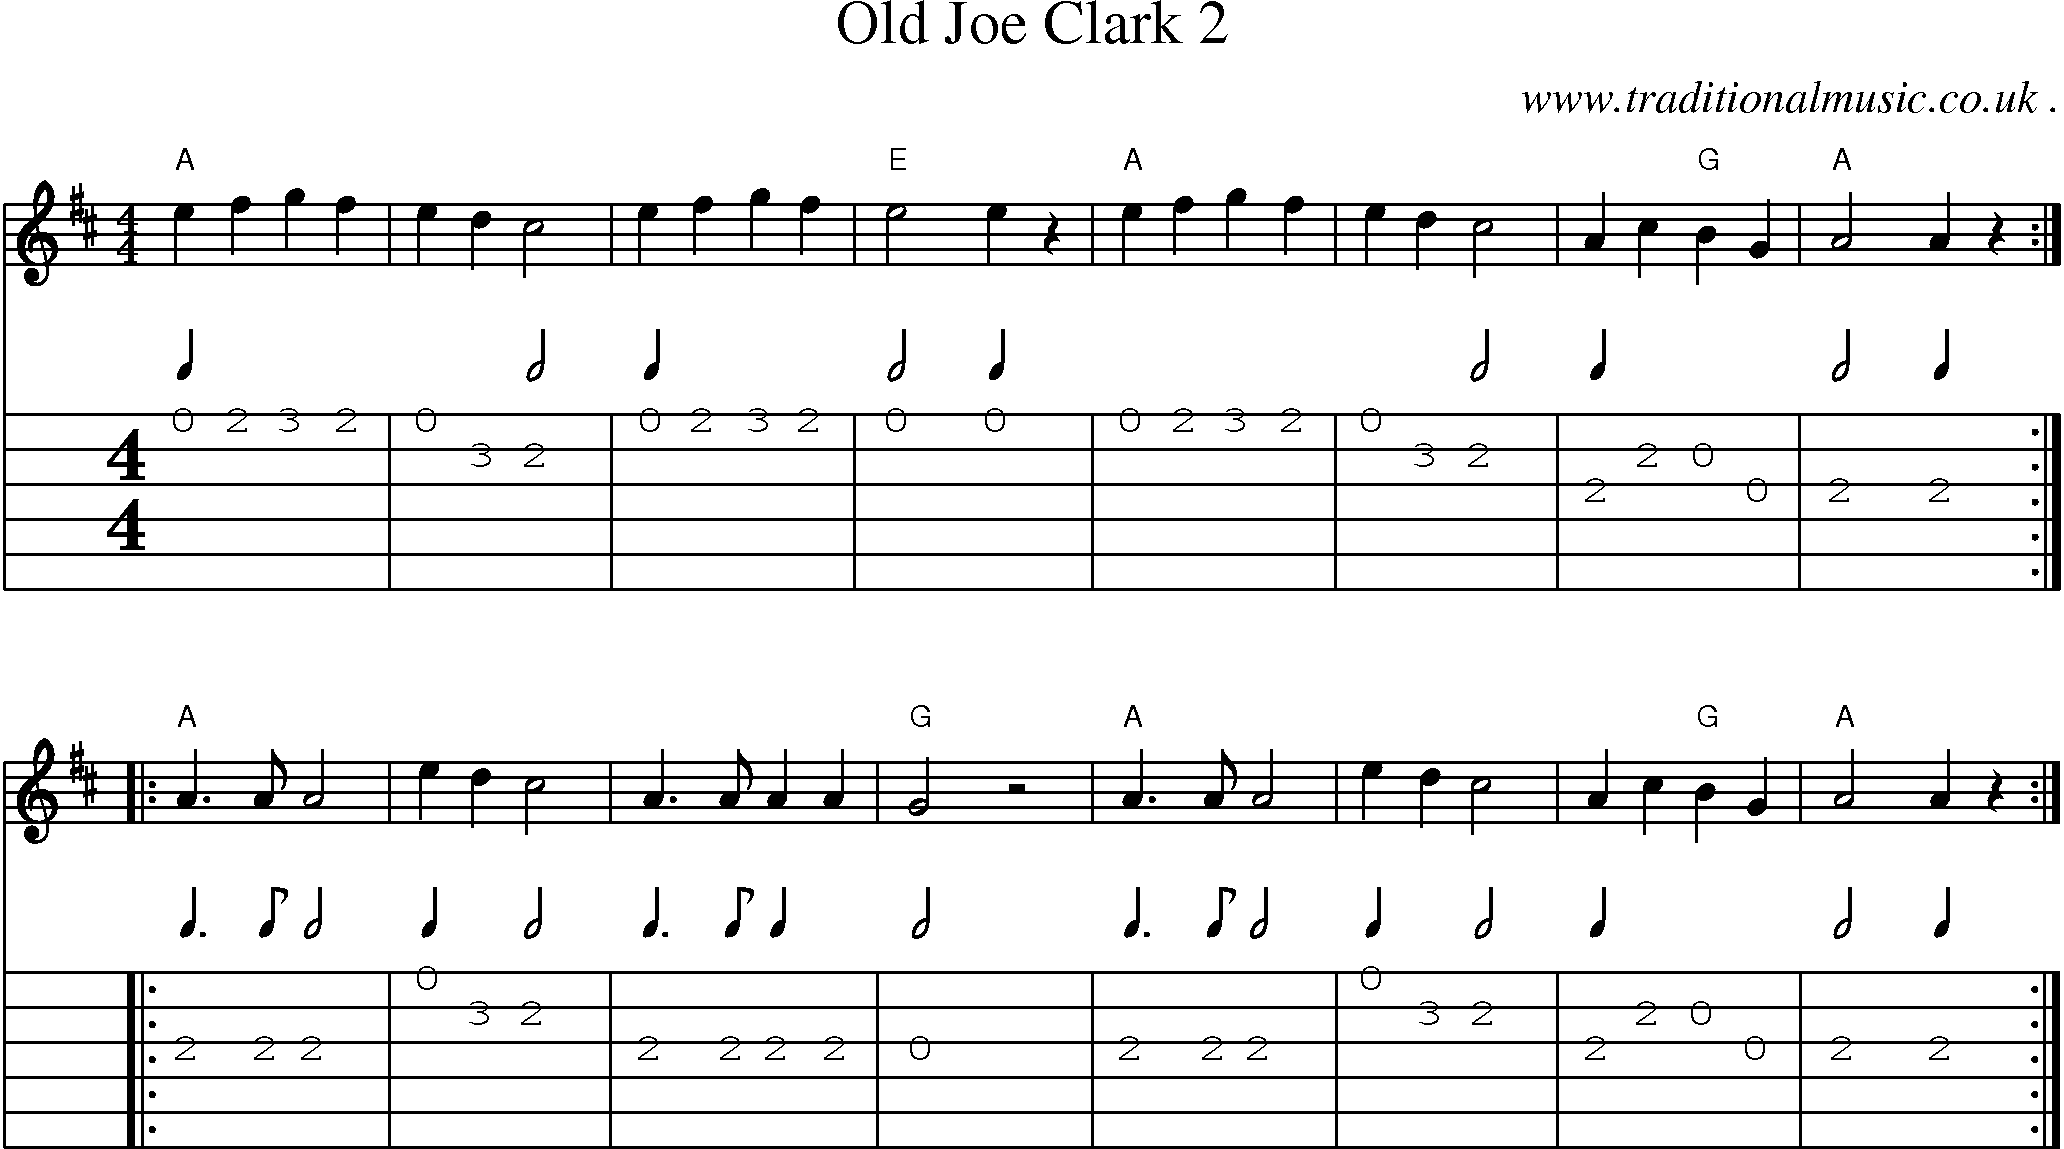 Music Score and Guitar Tabs for Old Joe Clark 2